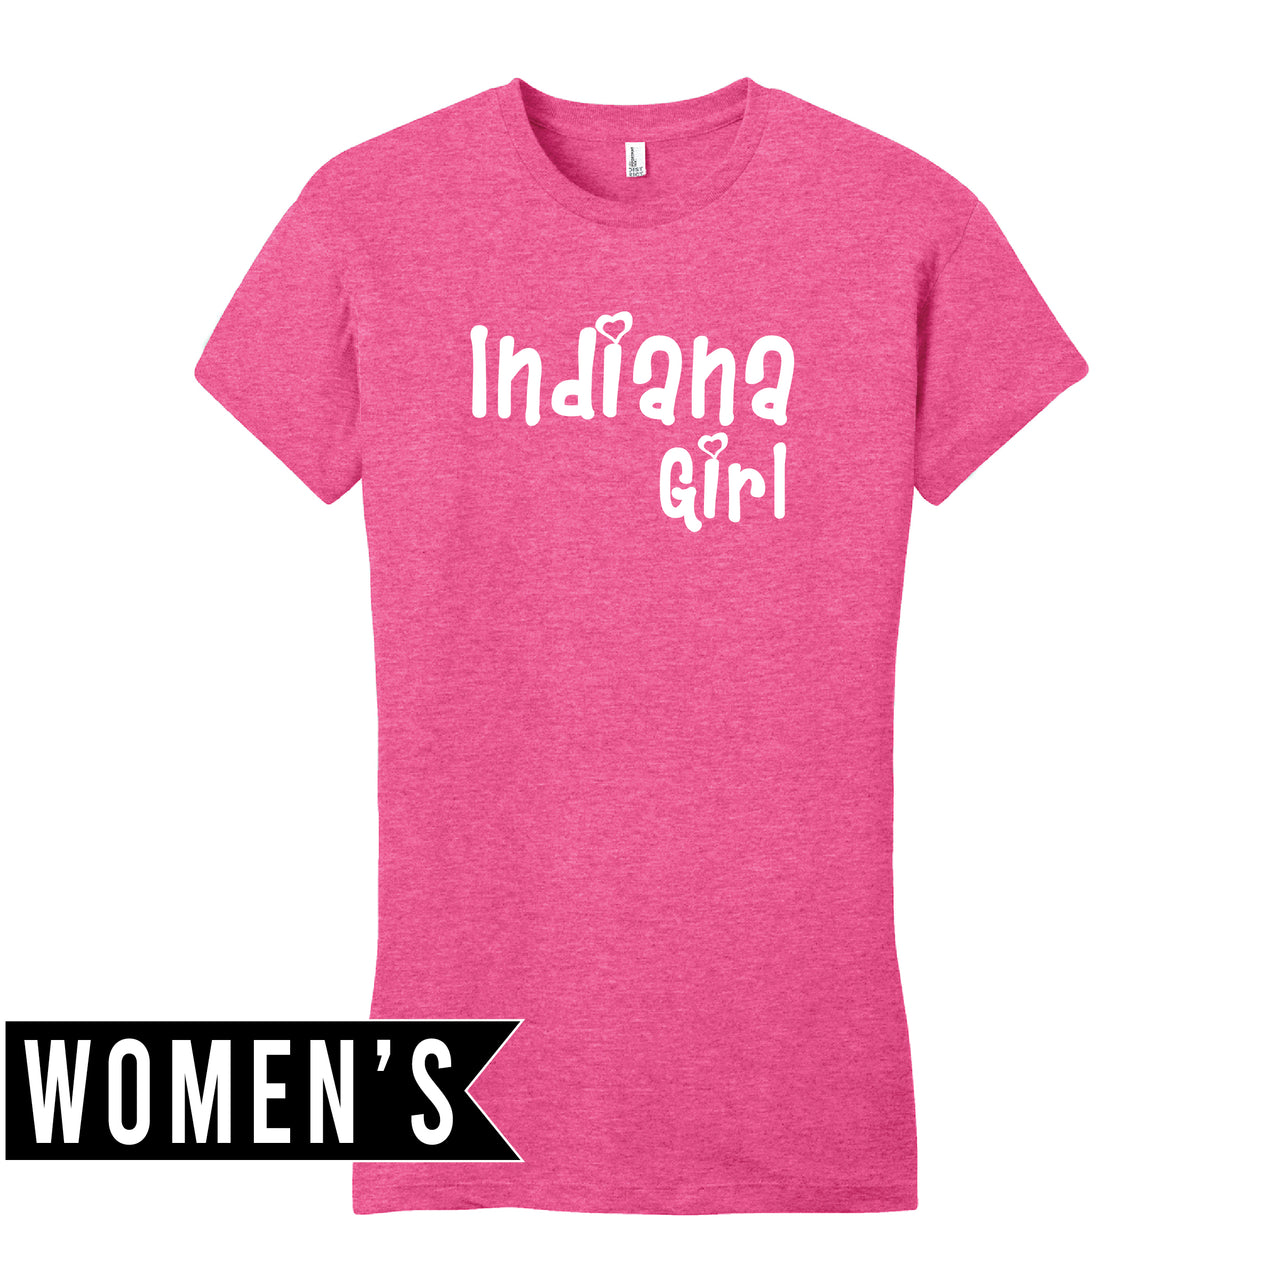 Women’s Fitted T-Shirt - Indiana Girl